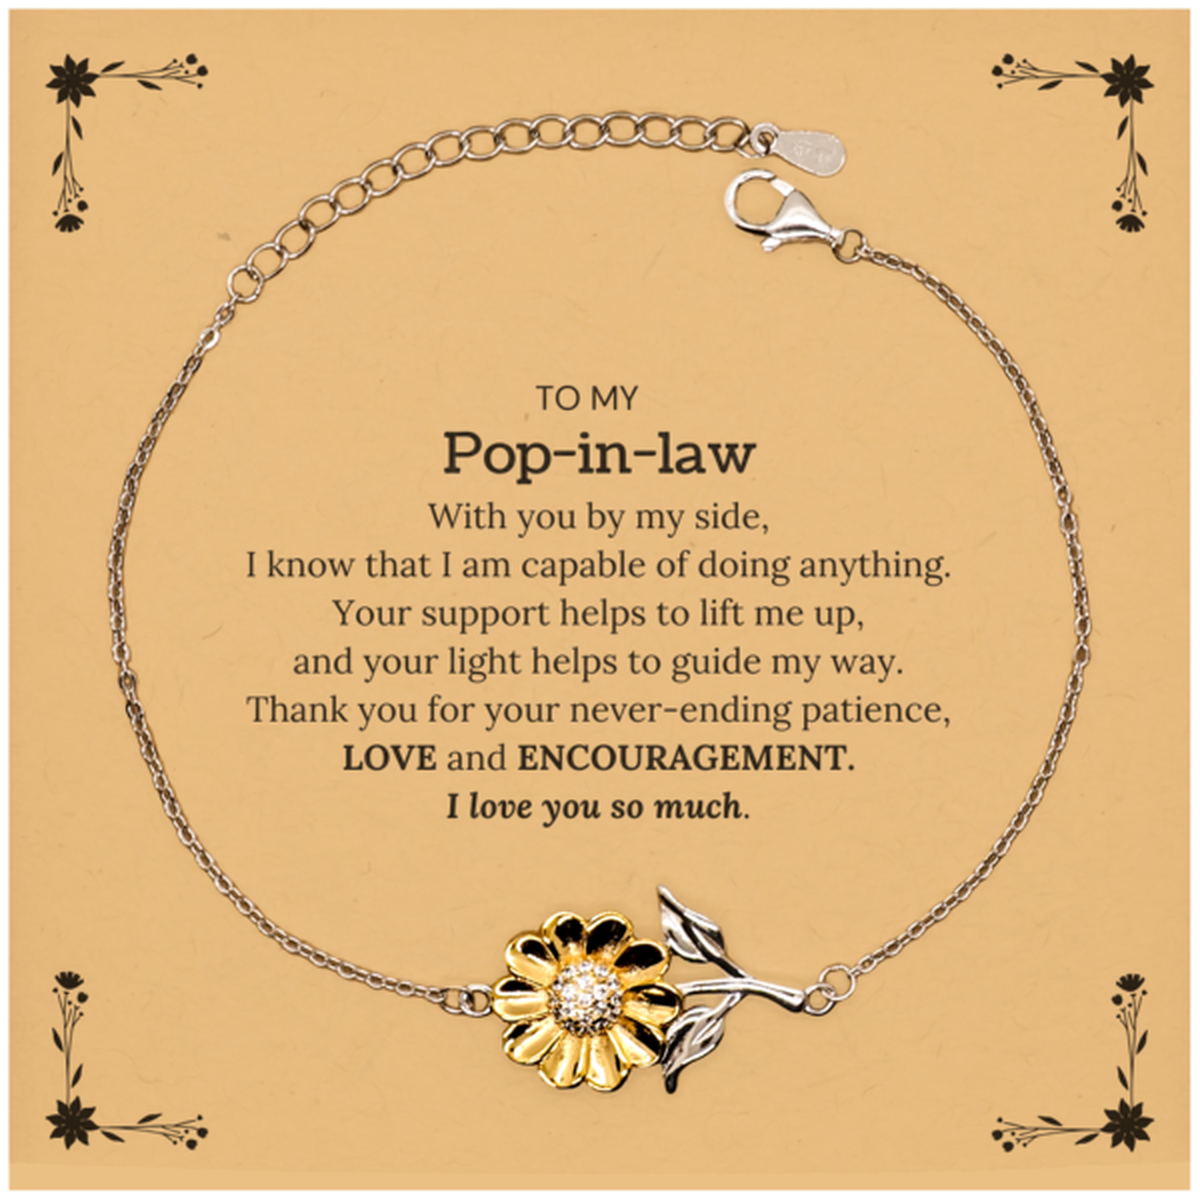 Appreciation Pop-in-law Sunflower Bracelet Gifts, To My Pop-in-law Birthday Christmas Wedding Keepsake Gifts for Pop-in-law With you by my side, I know that I am capable of doing anything. I love you so much